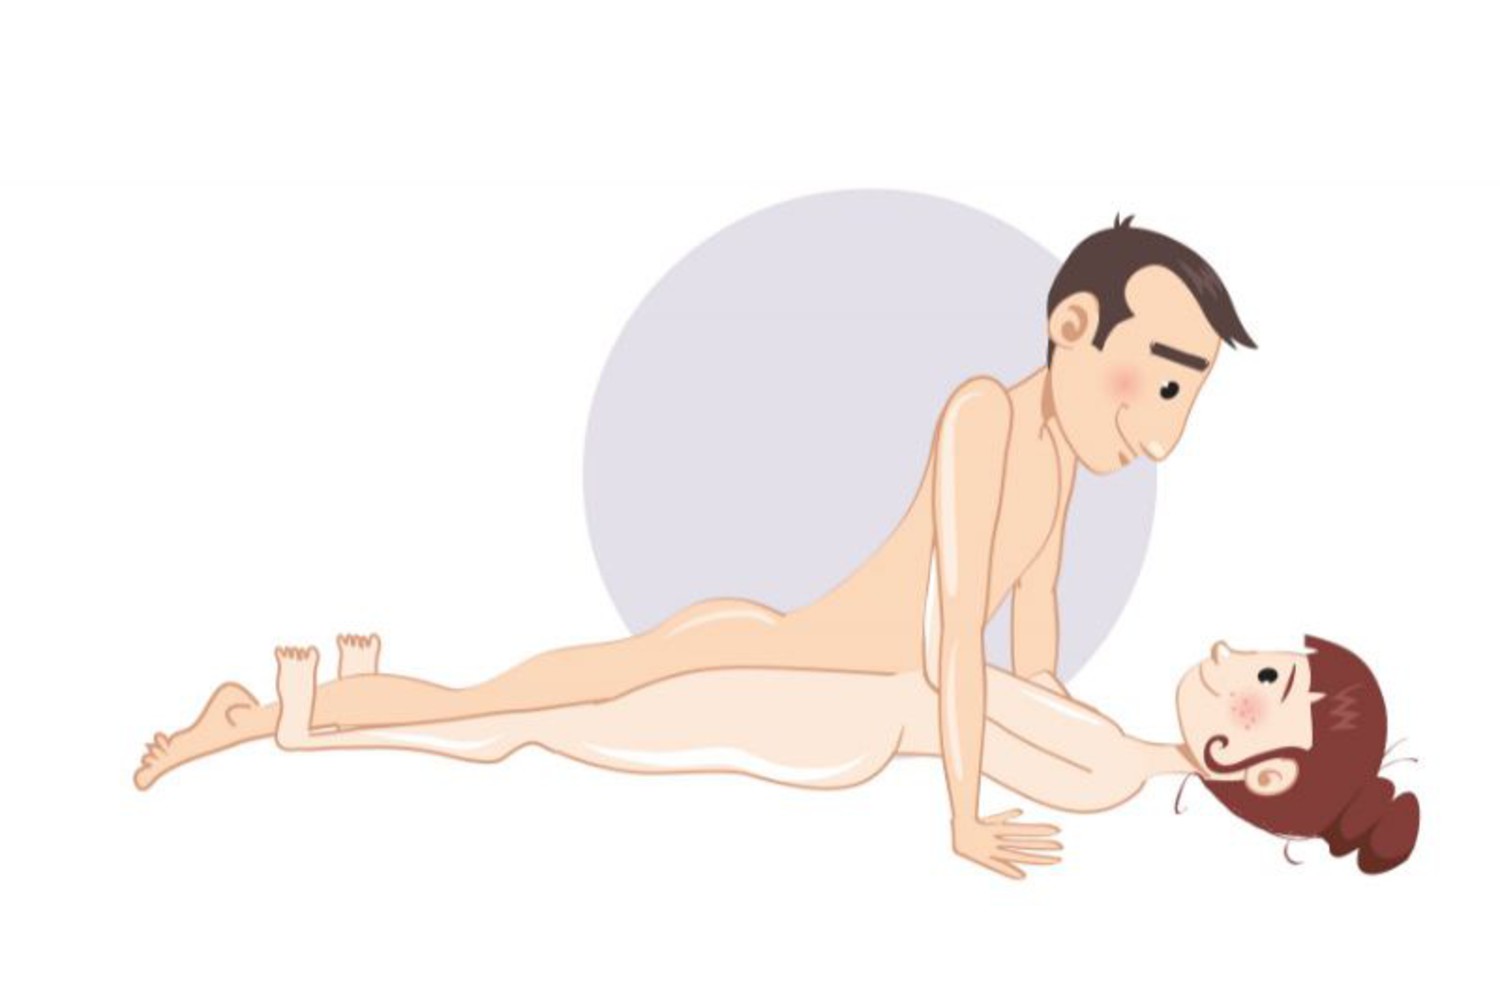 The Classic Sex Position.